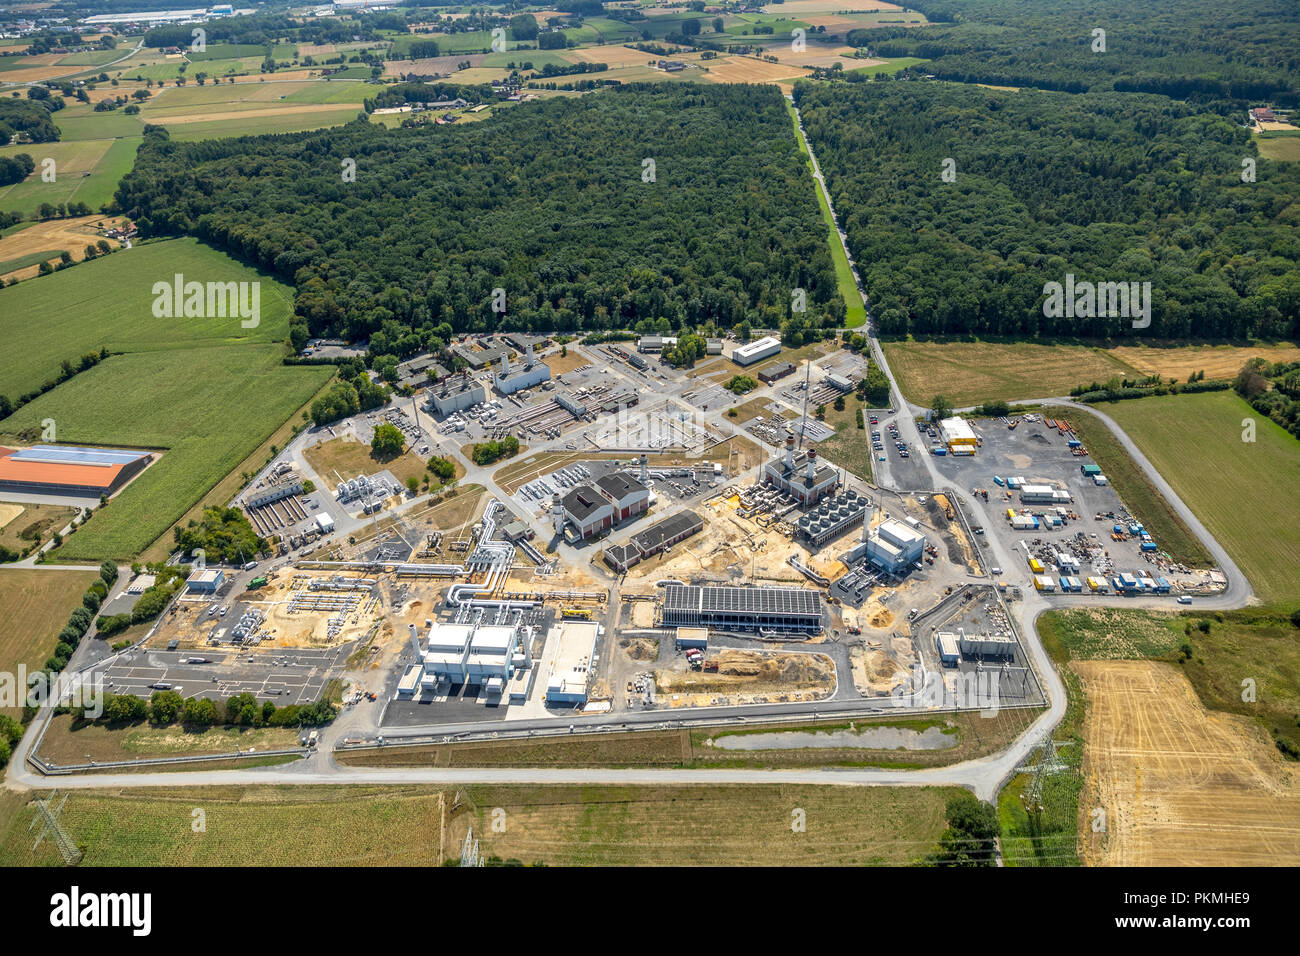 Aerial view, Natural gas compressor station, Open Grid Europe, Werne, Ruhr Area, North Rhine-Westphalia, Germany Stock Photo